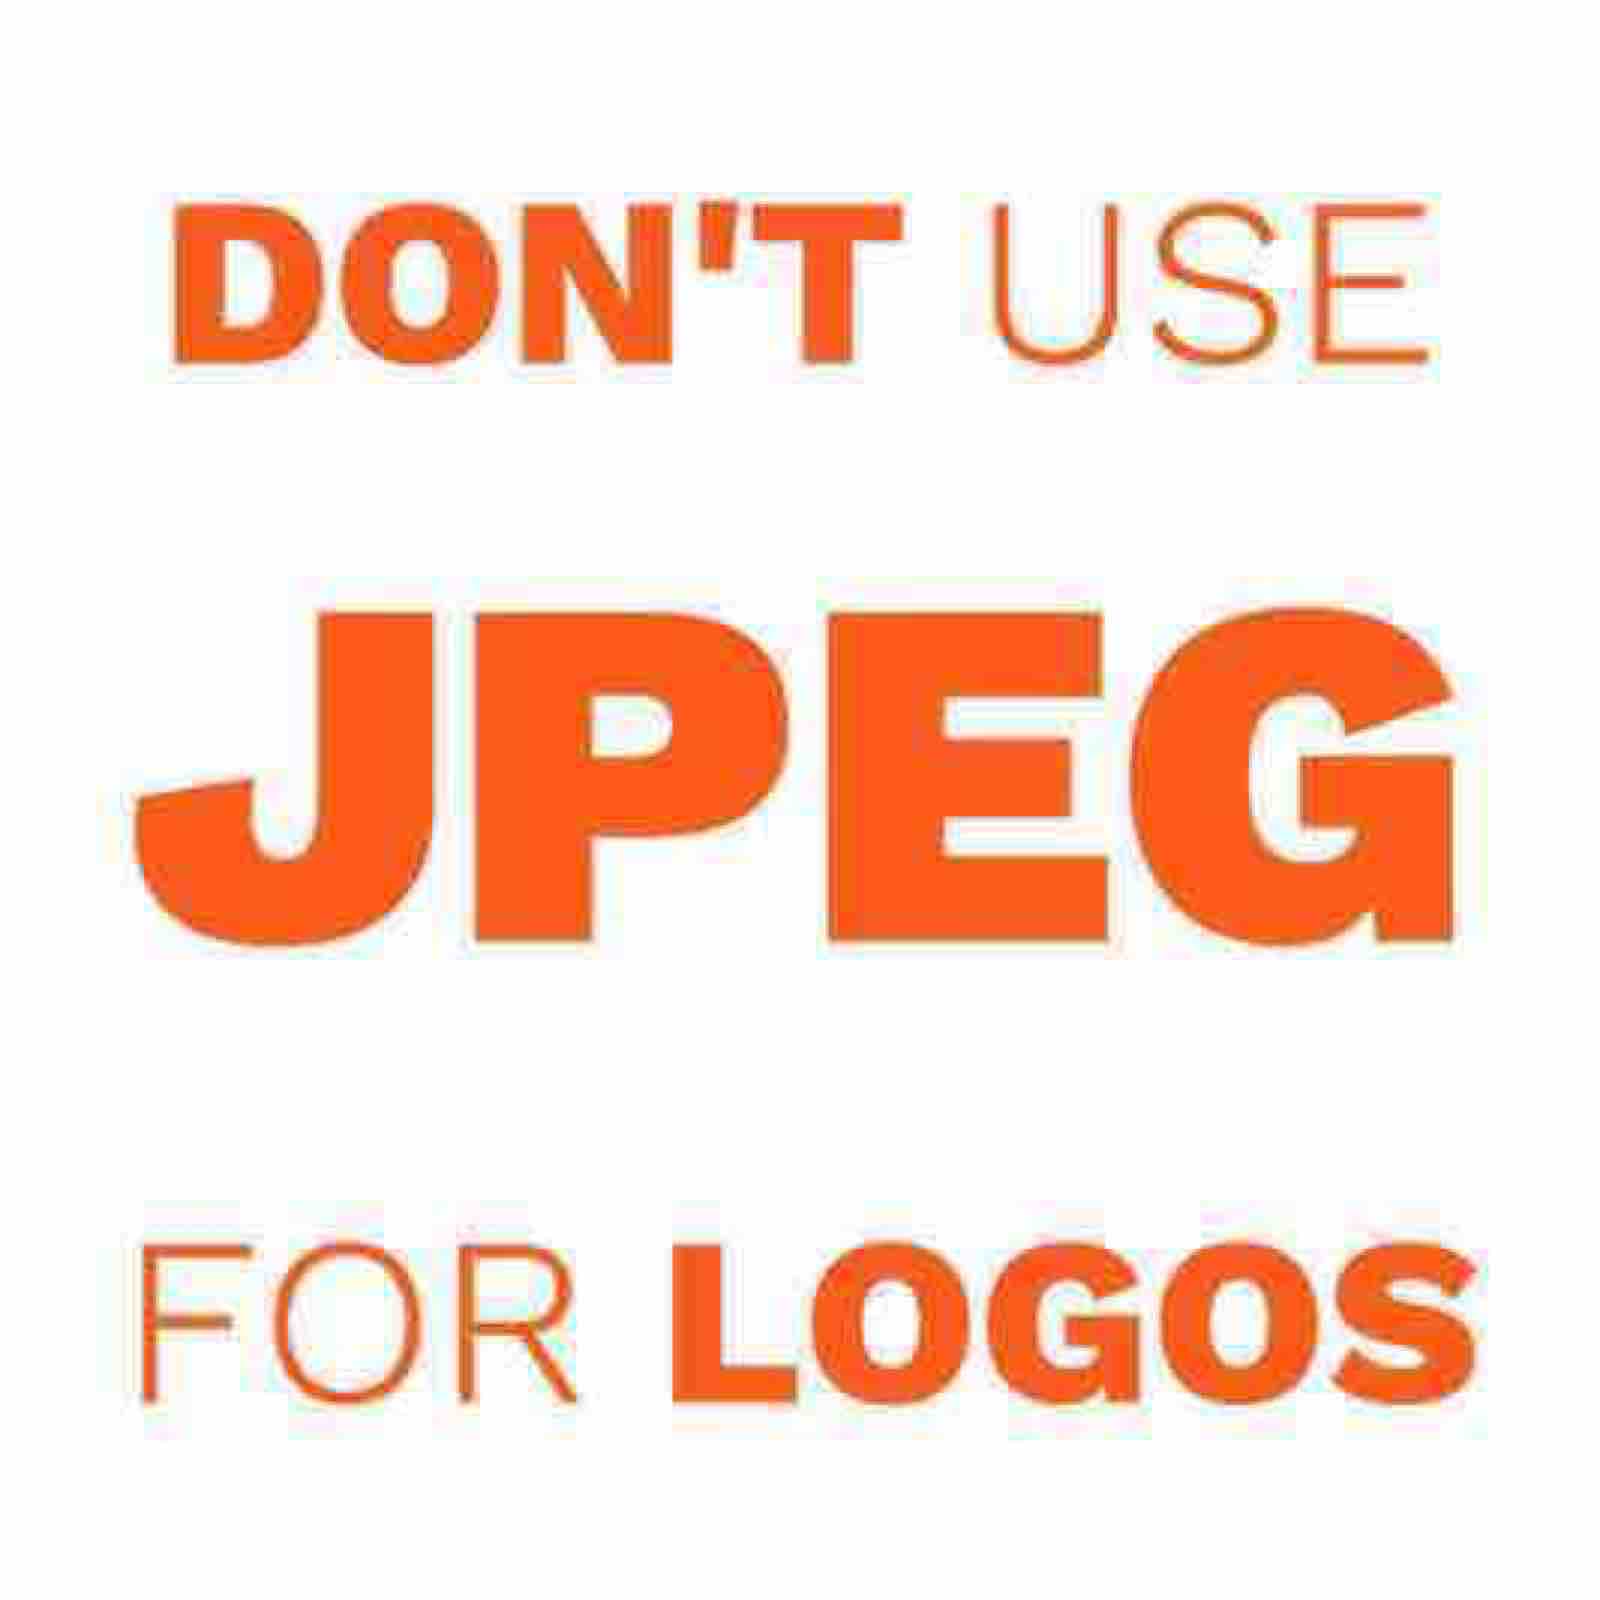 DON'T USE JPEG FOR LOGOS…